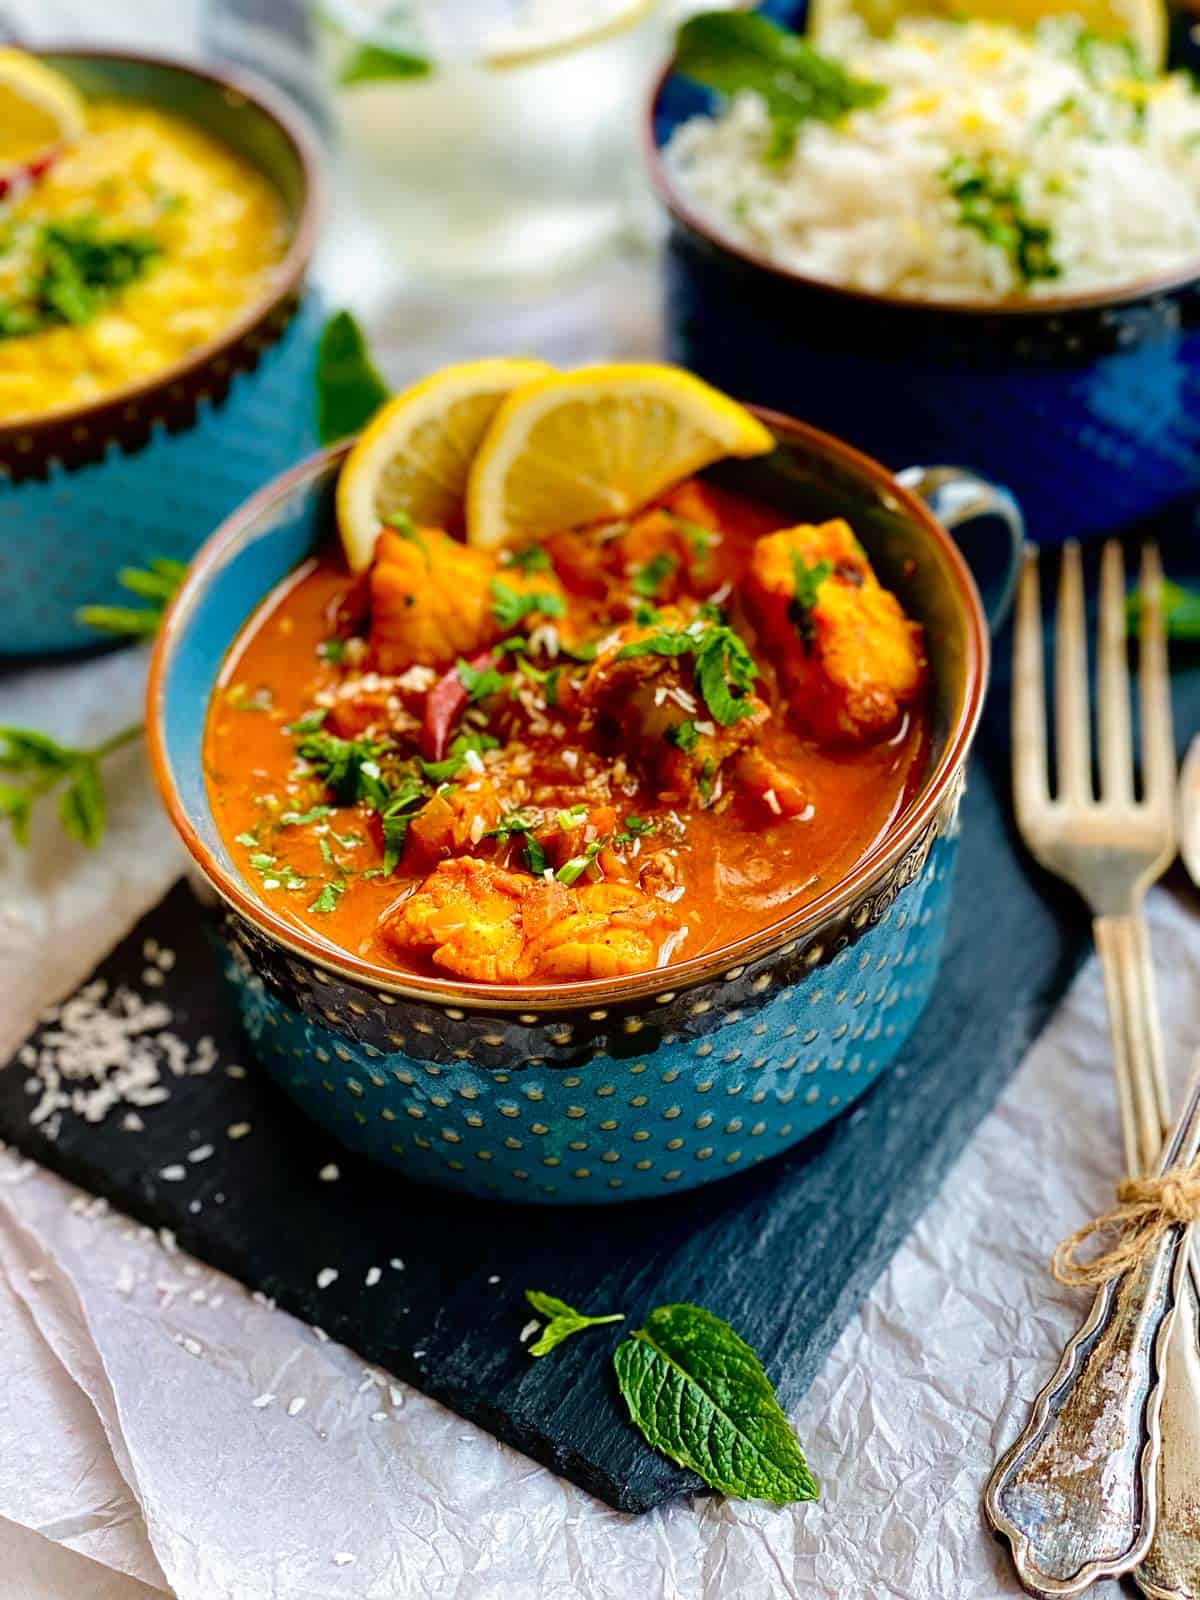 Monkfish curry in blue bowls.